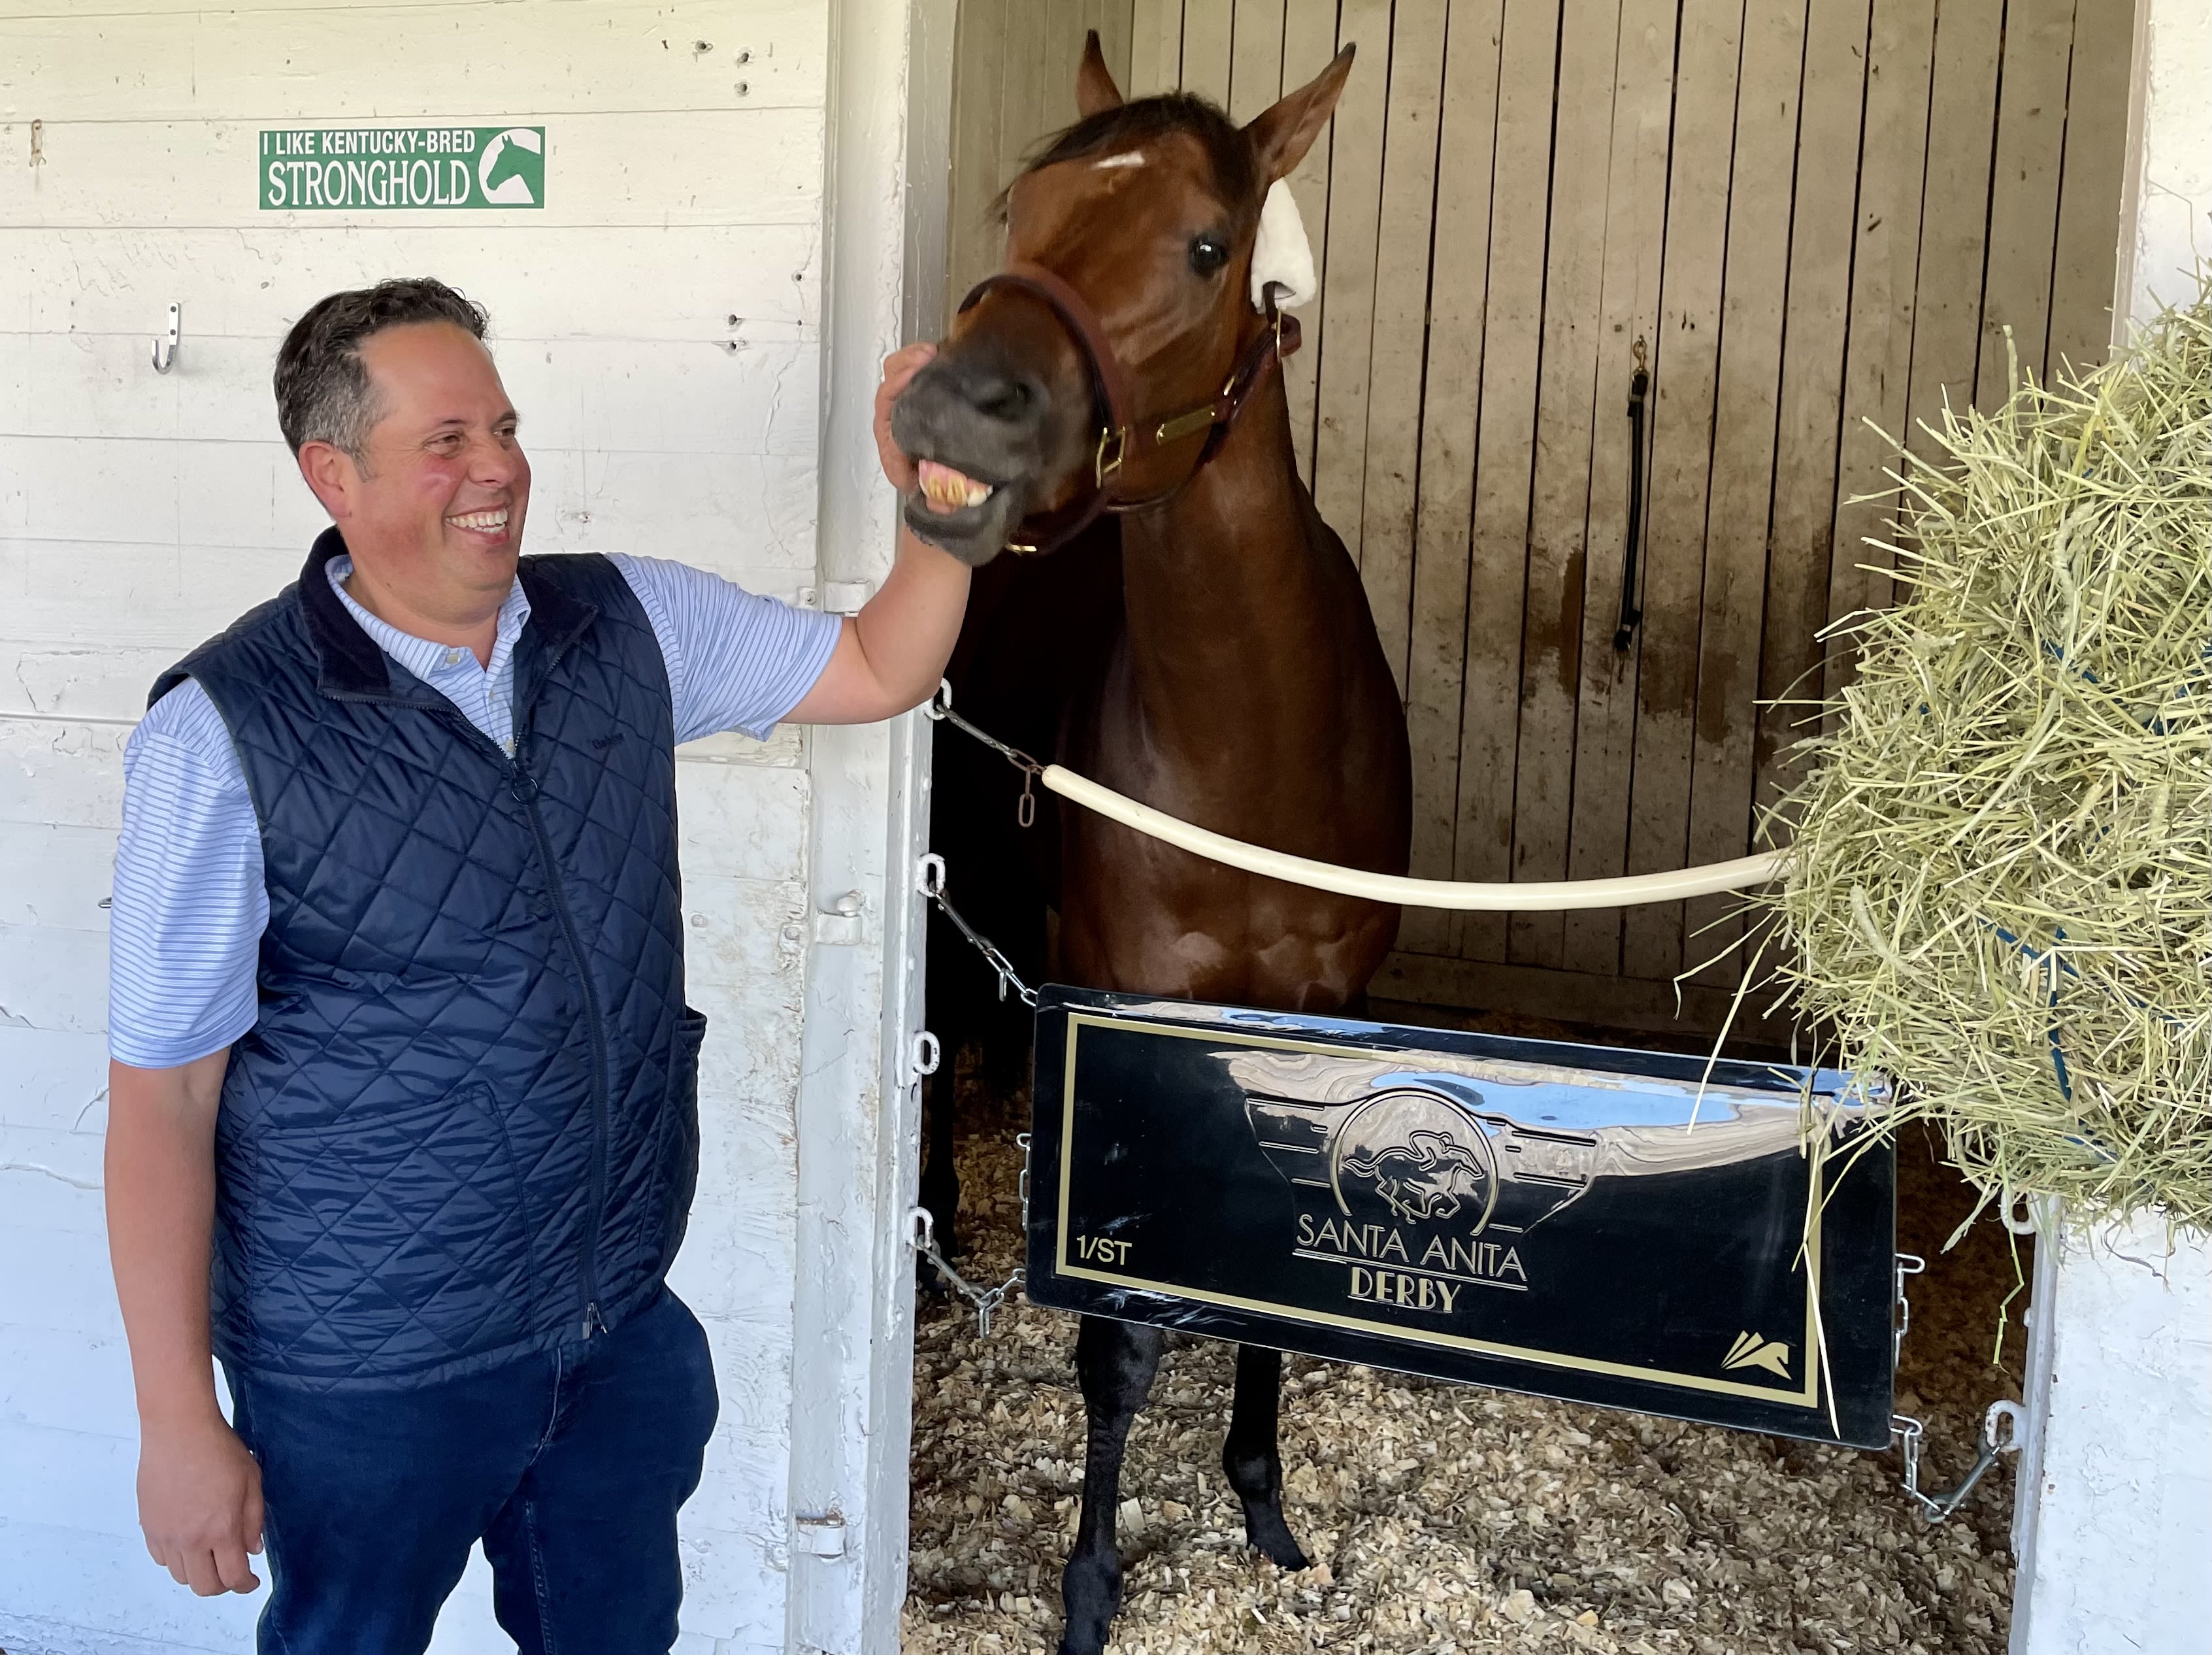 Bryce Miller: Del Mar trainer Phil D'Amato ditches law, lands in first Kentucky Derby with Stronghold